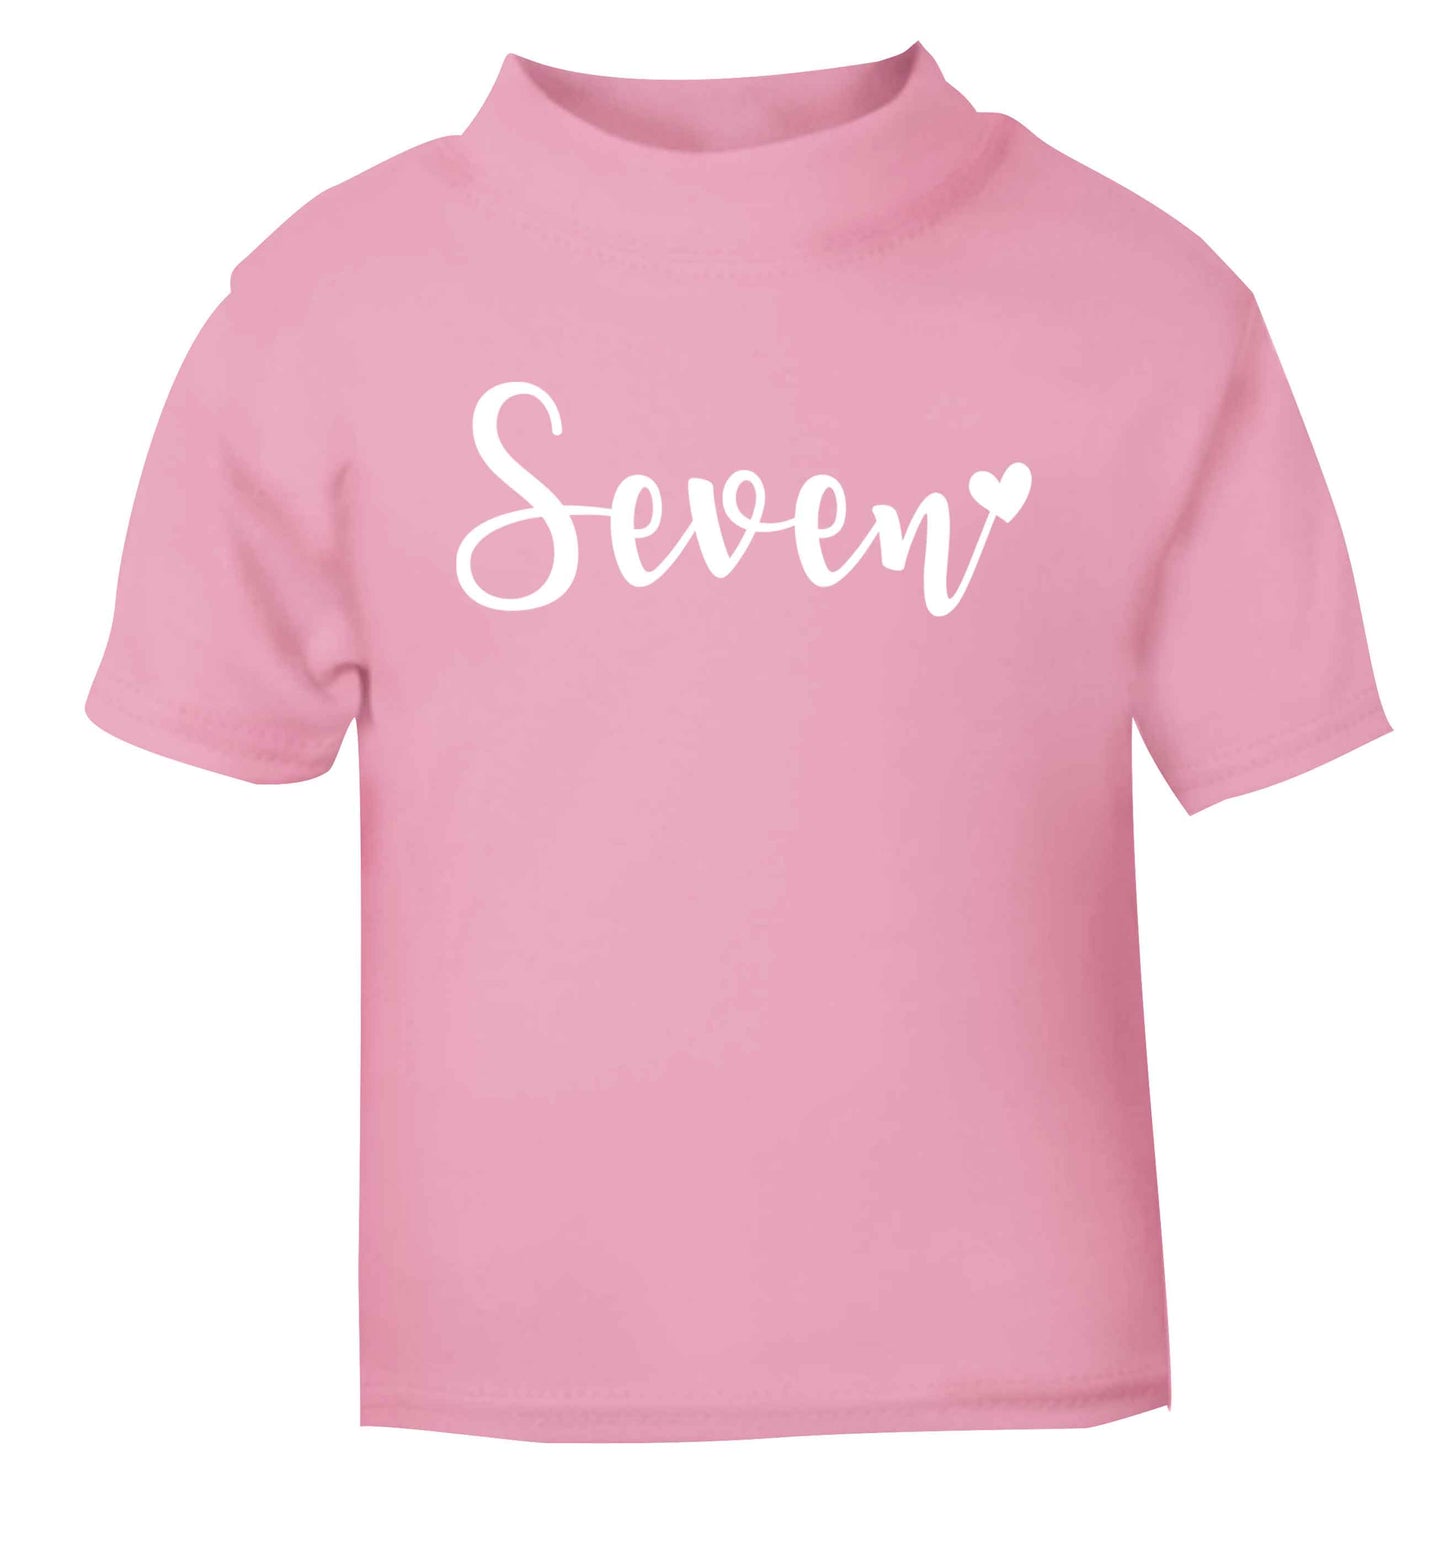 Seven and heart light pink baby toddler Tshirt 2 Years